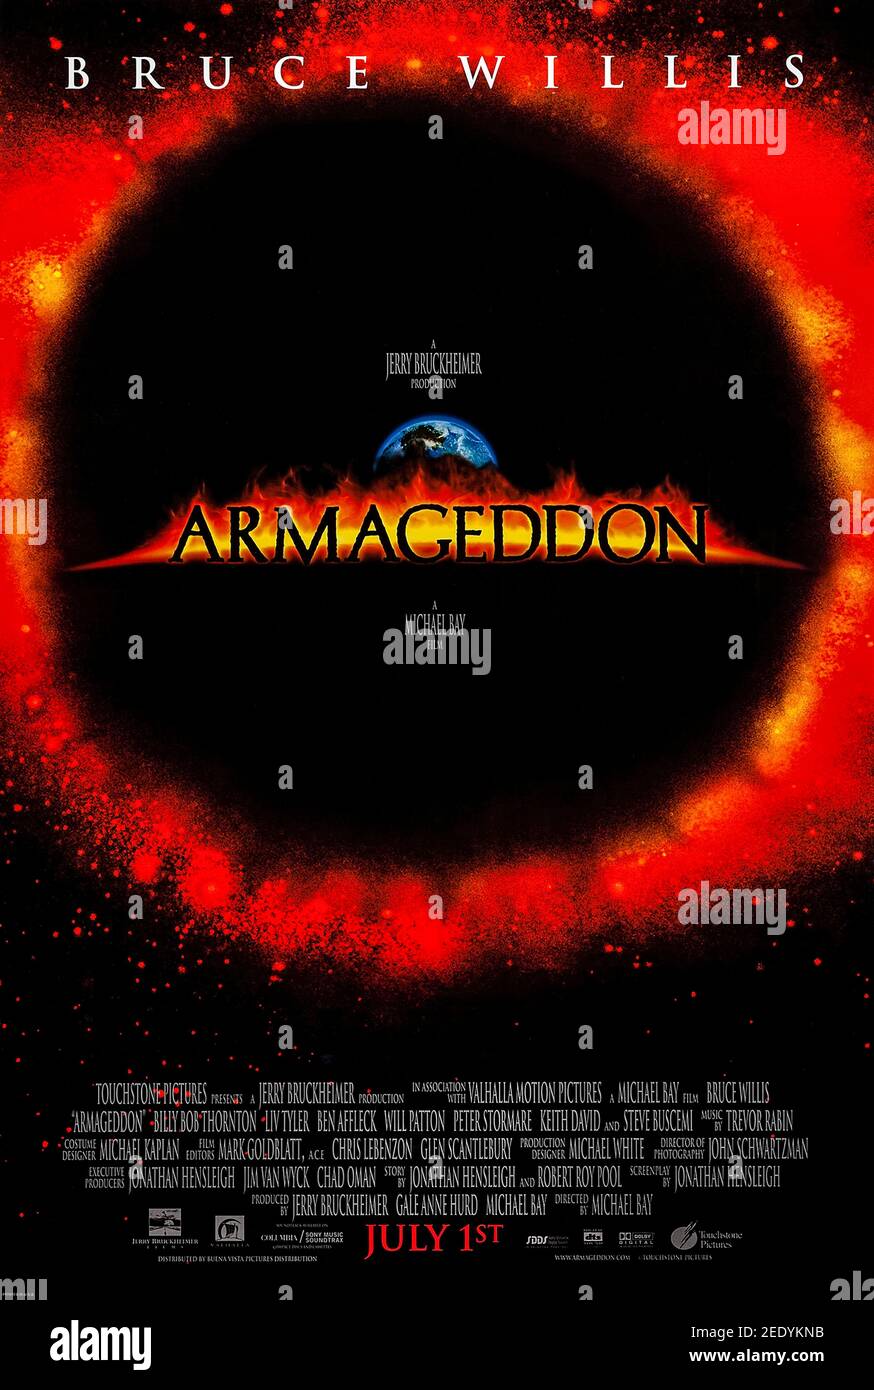 Armageddon (1998) directed by Michael Bay and starring Bruce Willis, Billy Bob Thornton and Ben Affleck. After discovering that an asteroid the size of Texas is going to impact Earth in less than a month, NASA recruits a misfit team of deep-core drillers to save the planet. Stock Photo